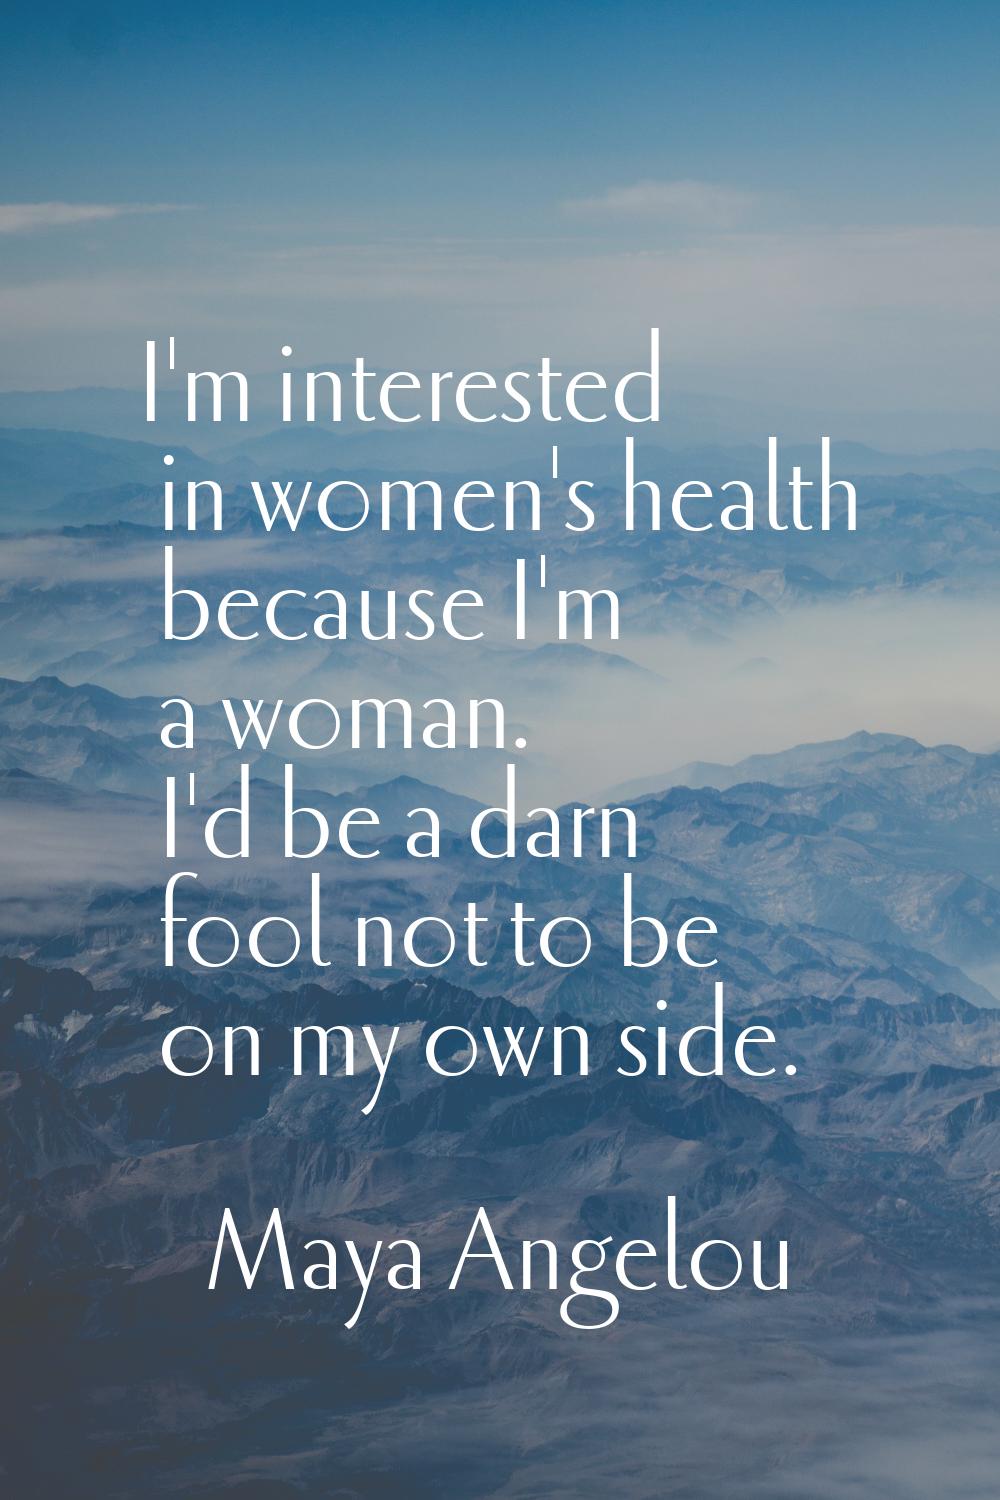 I'm interested in women's health because I'm a woman. I'd be a darn fool not to be on my own side.